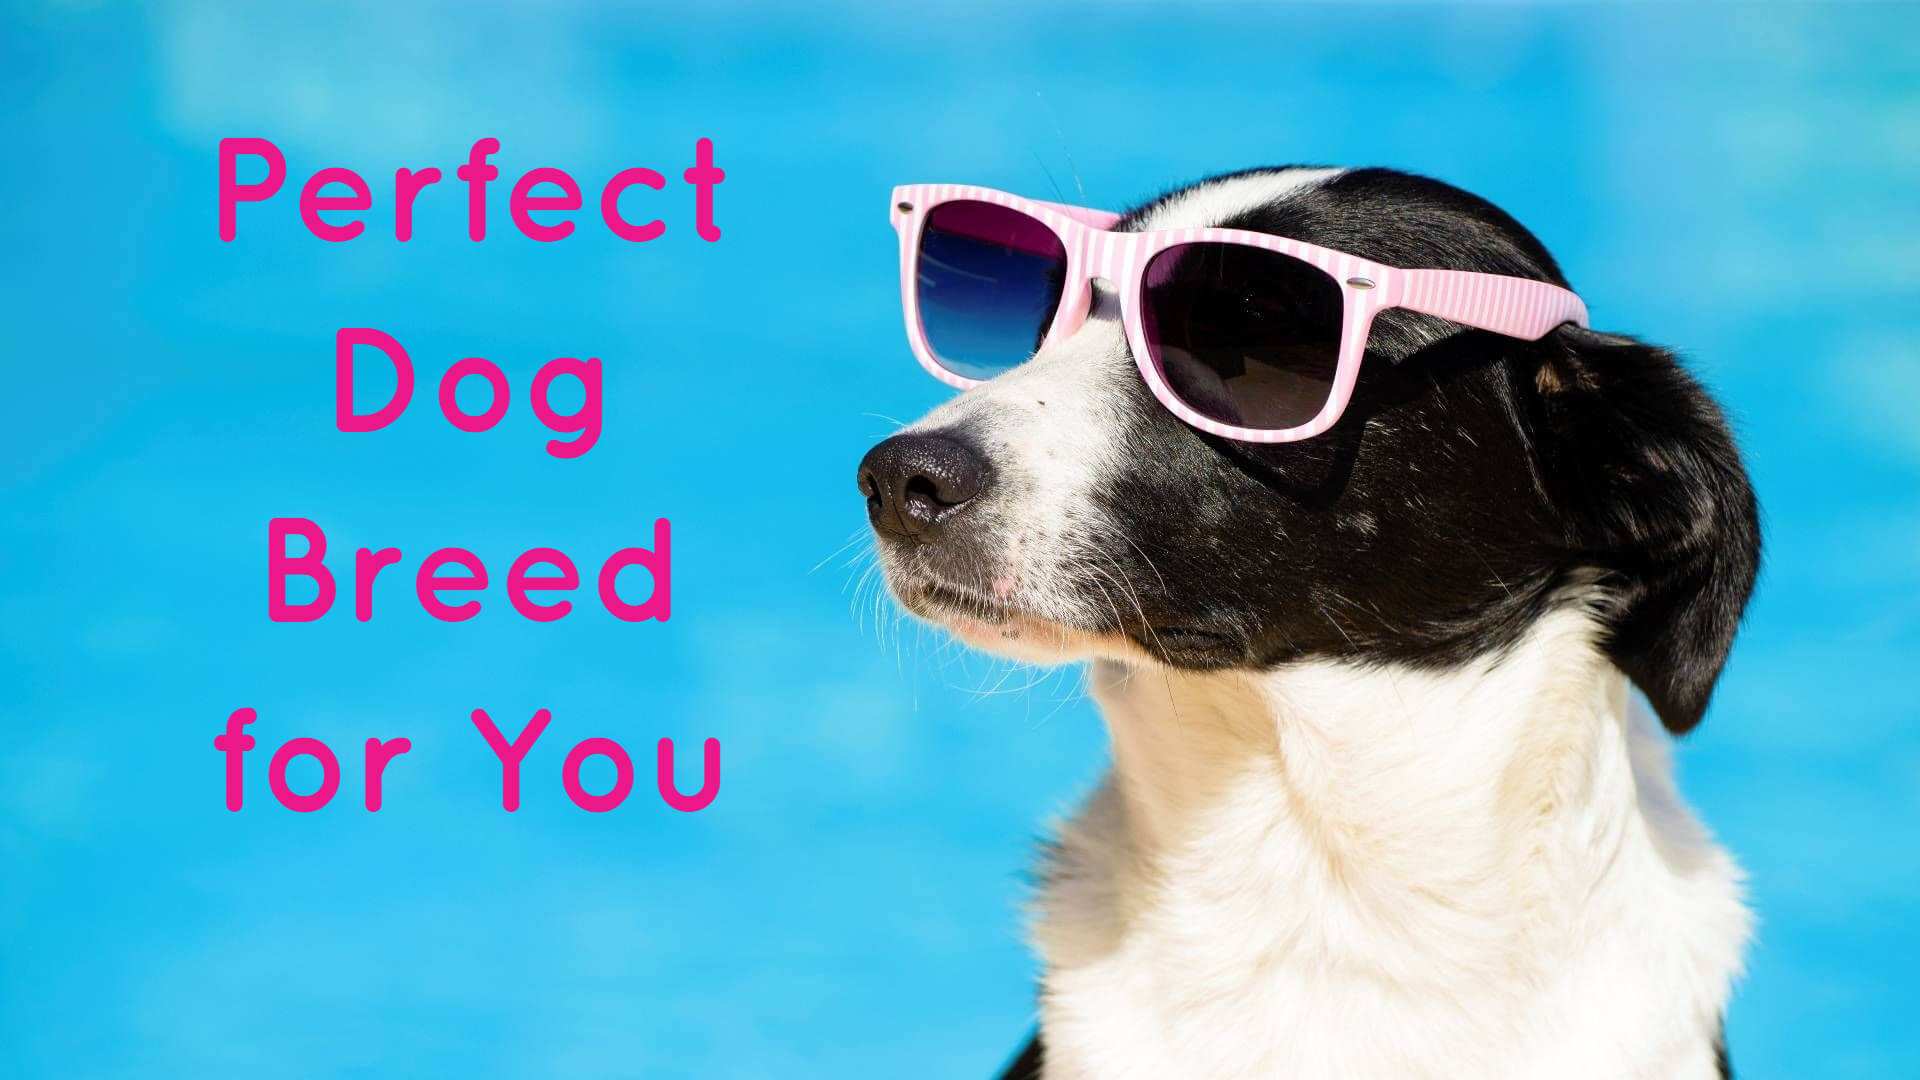 What Dog Breed Is the Perfect for You